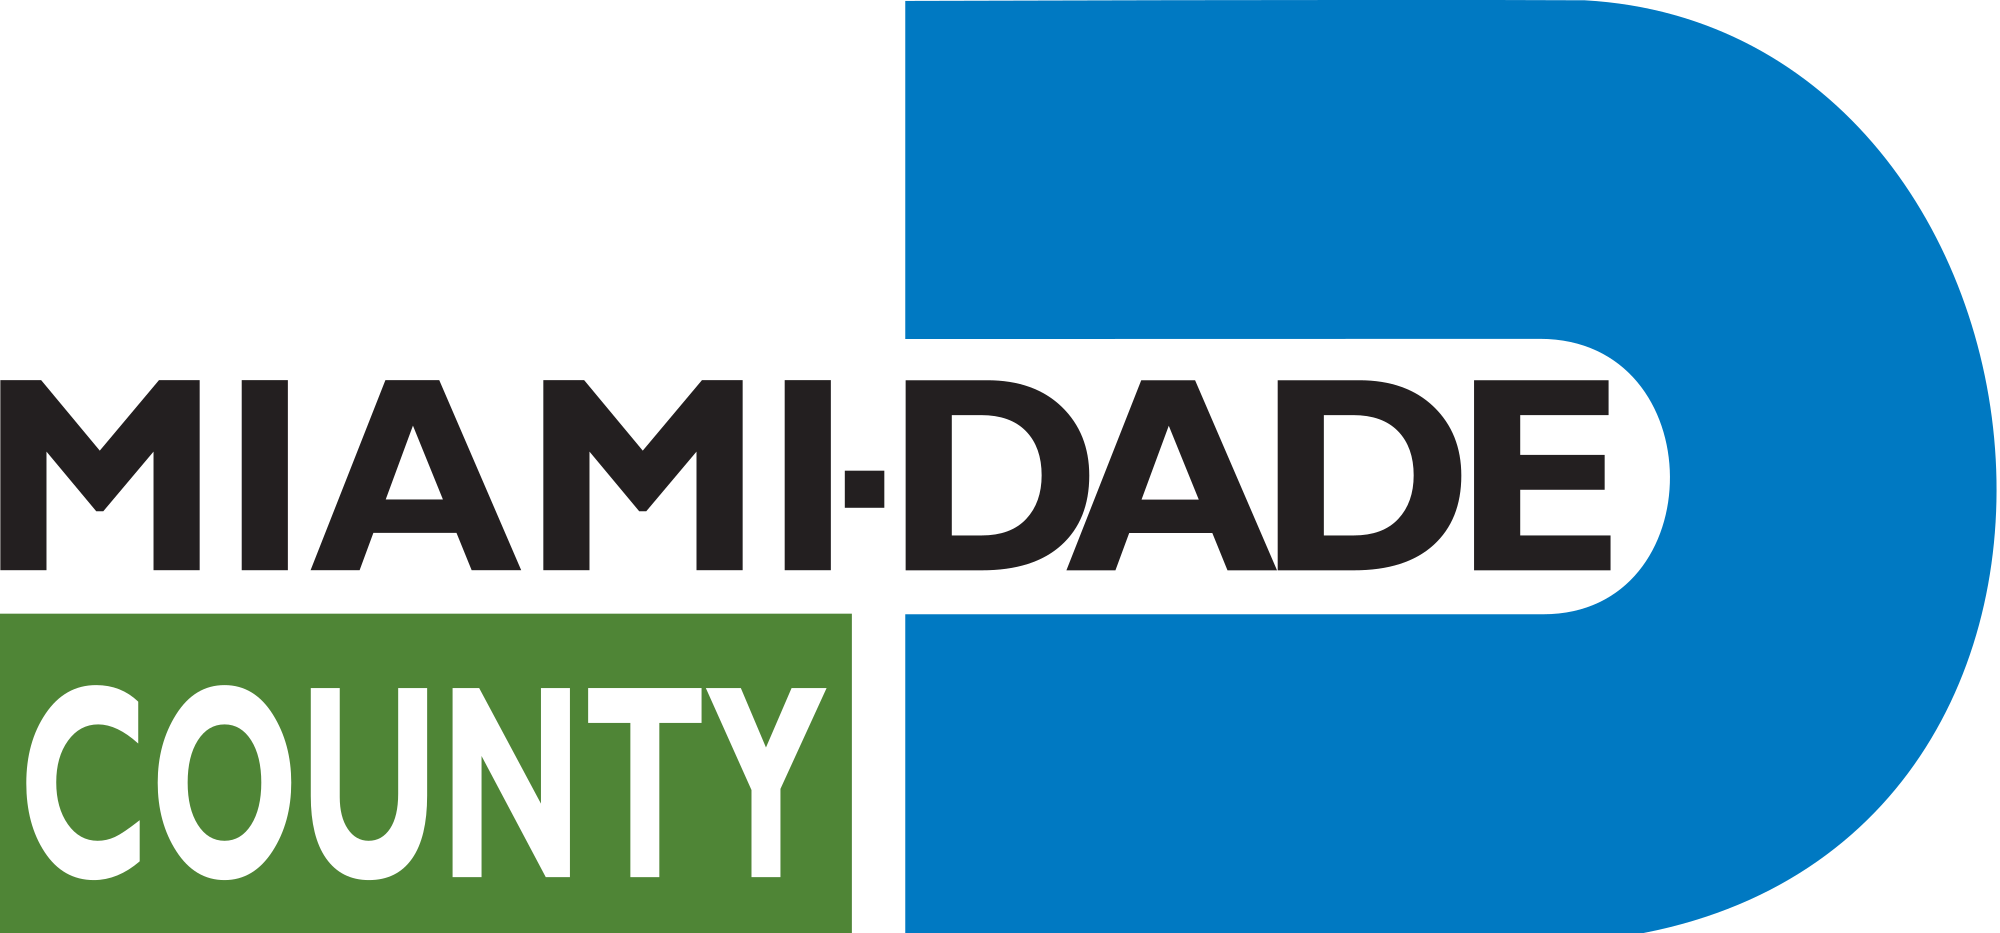 2000px-Logo_Miami-Dade_County.svg.png